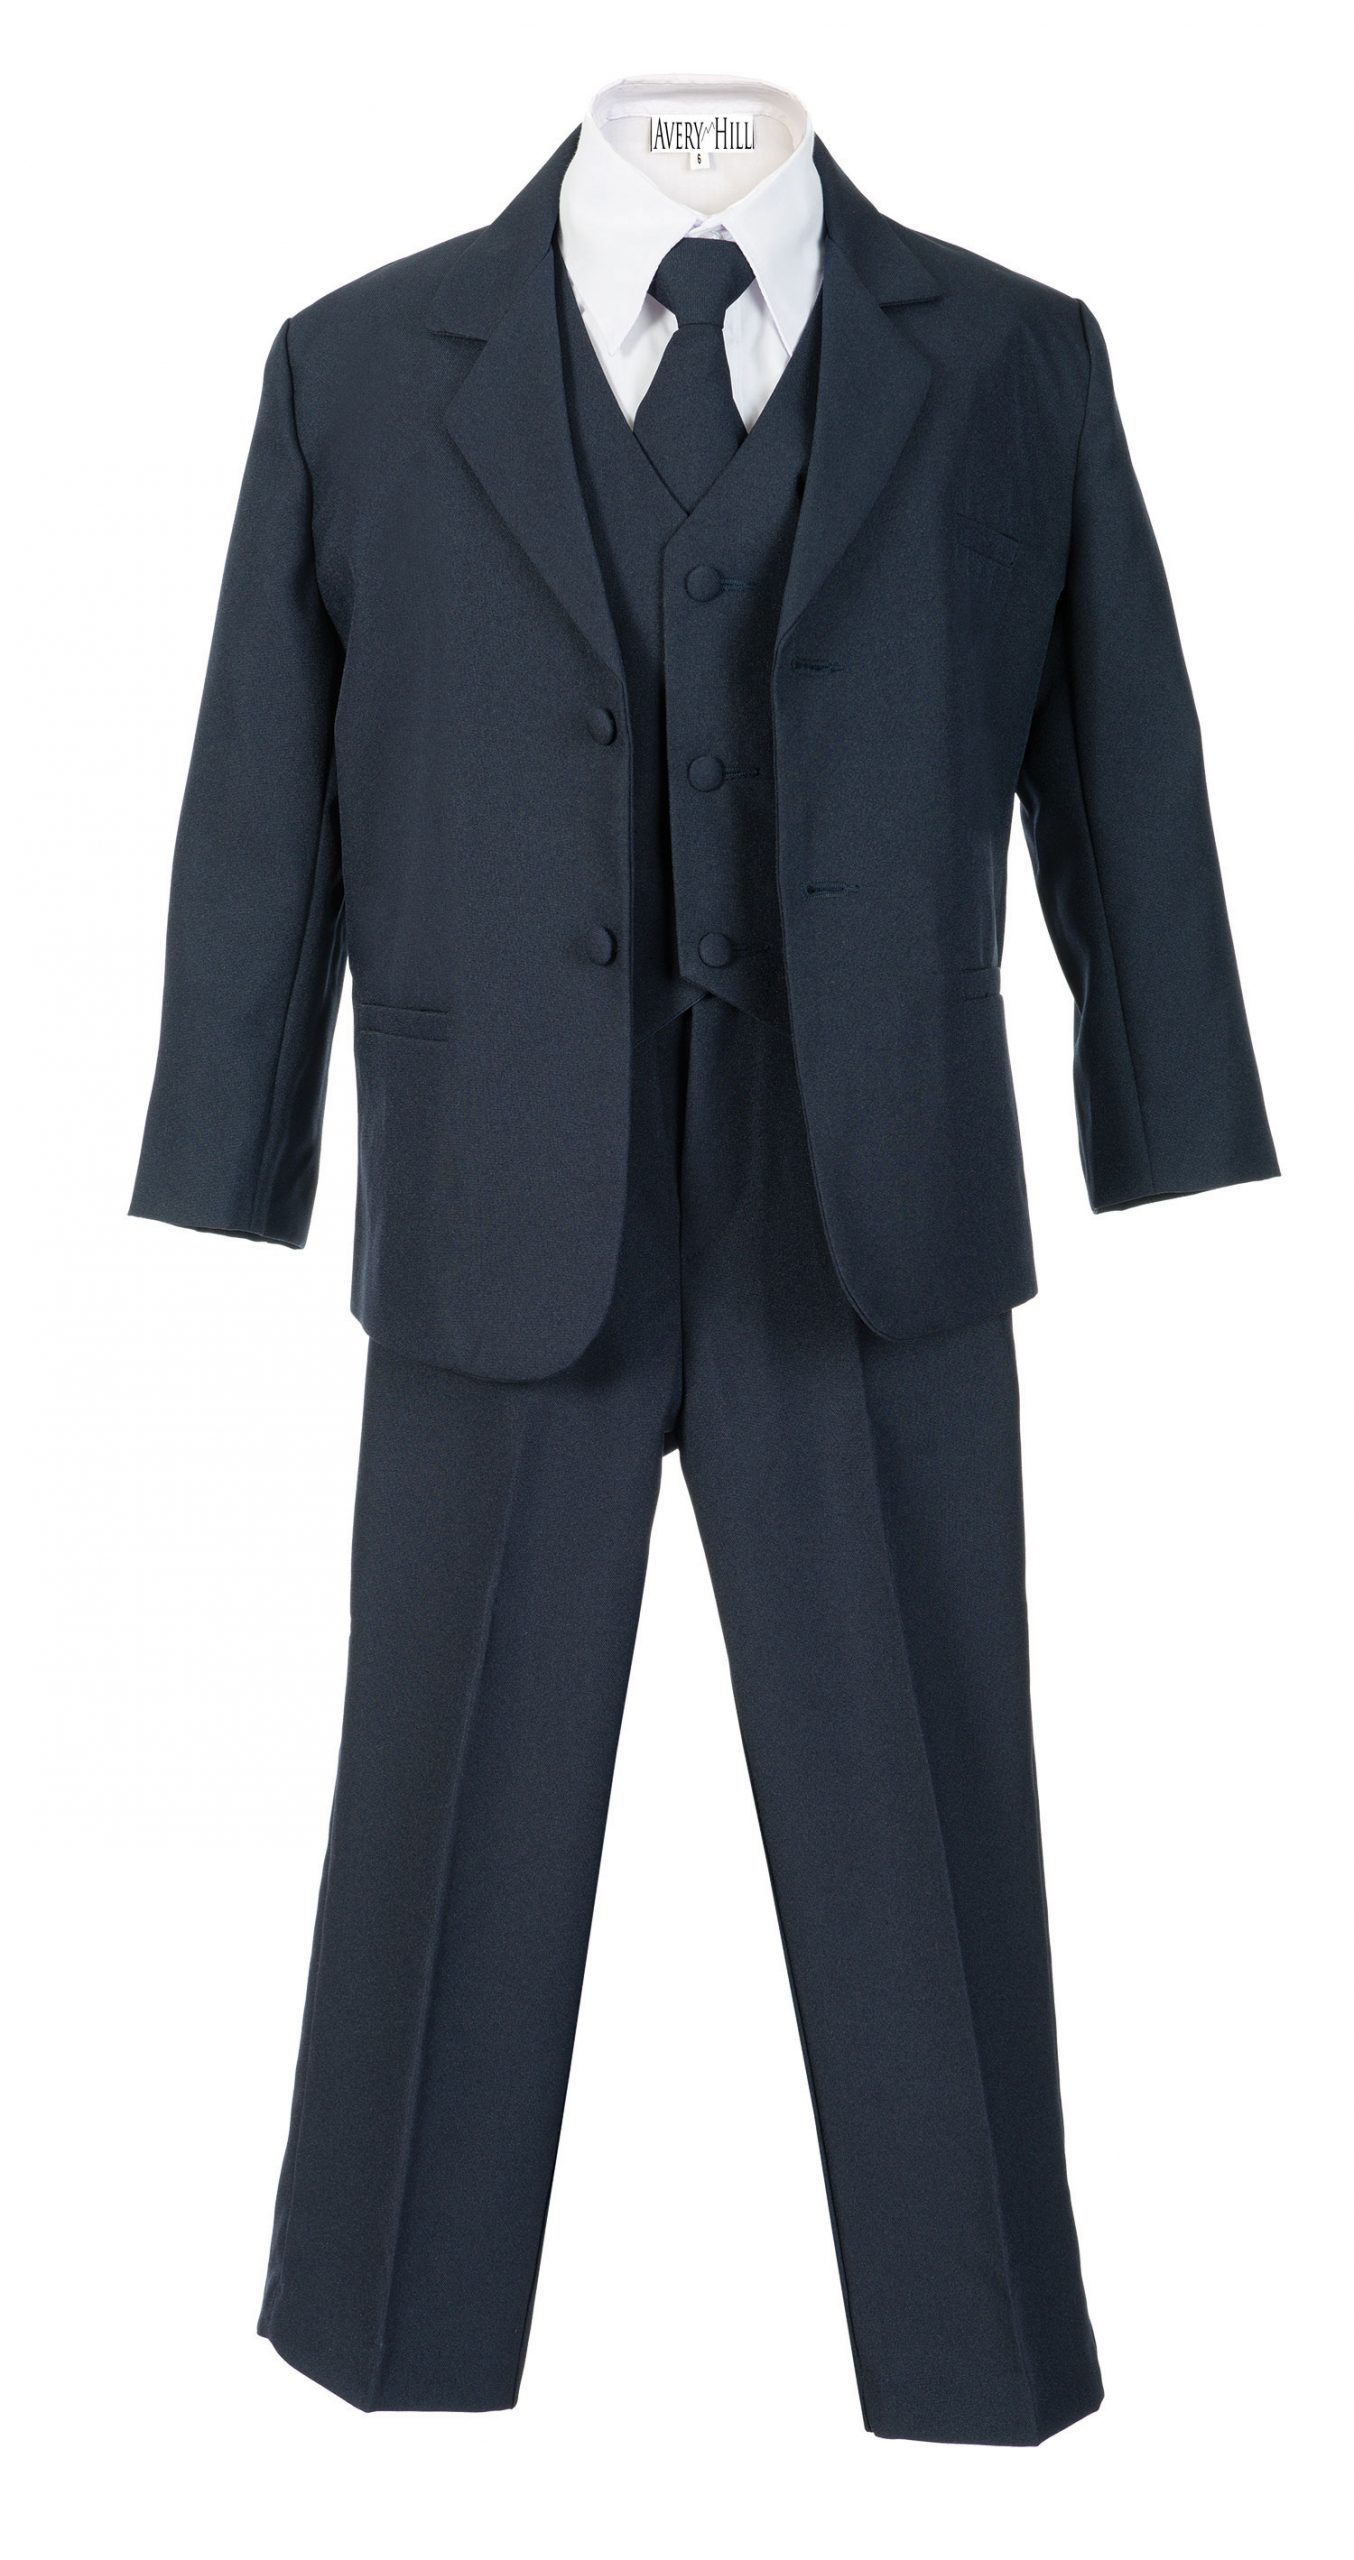 Avery Hill Boys Formal 5 Piece Suit with Shirt and Vest Navy - M